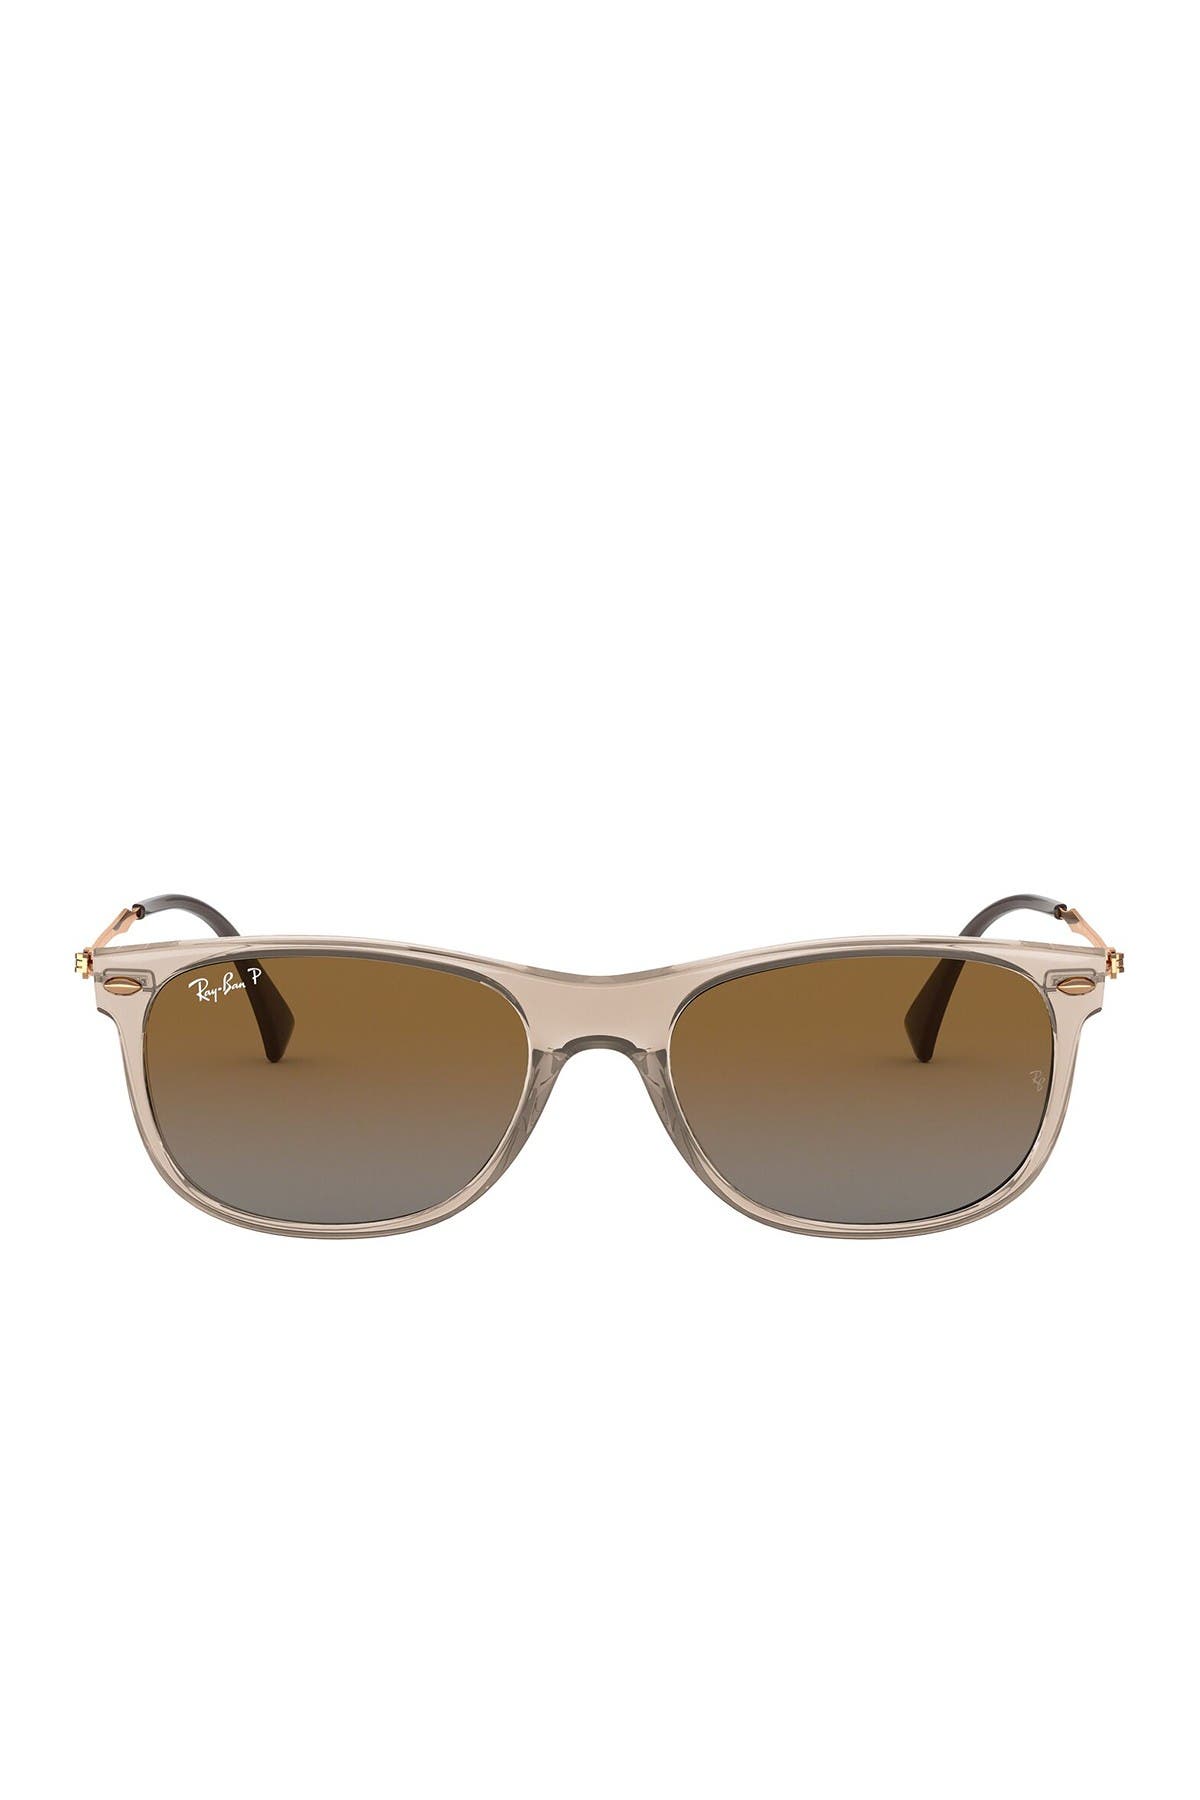 Ray Ban 55mm Square Sunglasses Nordstrom Rack